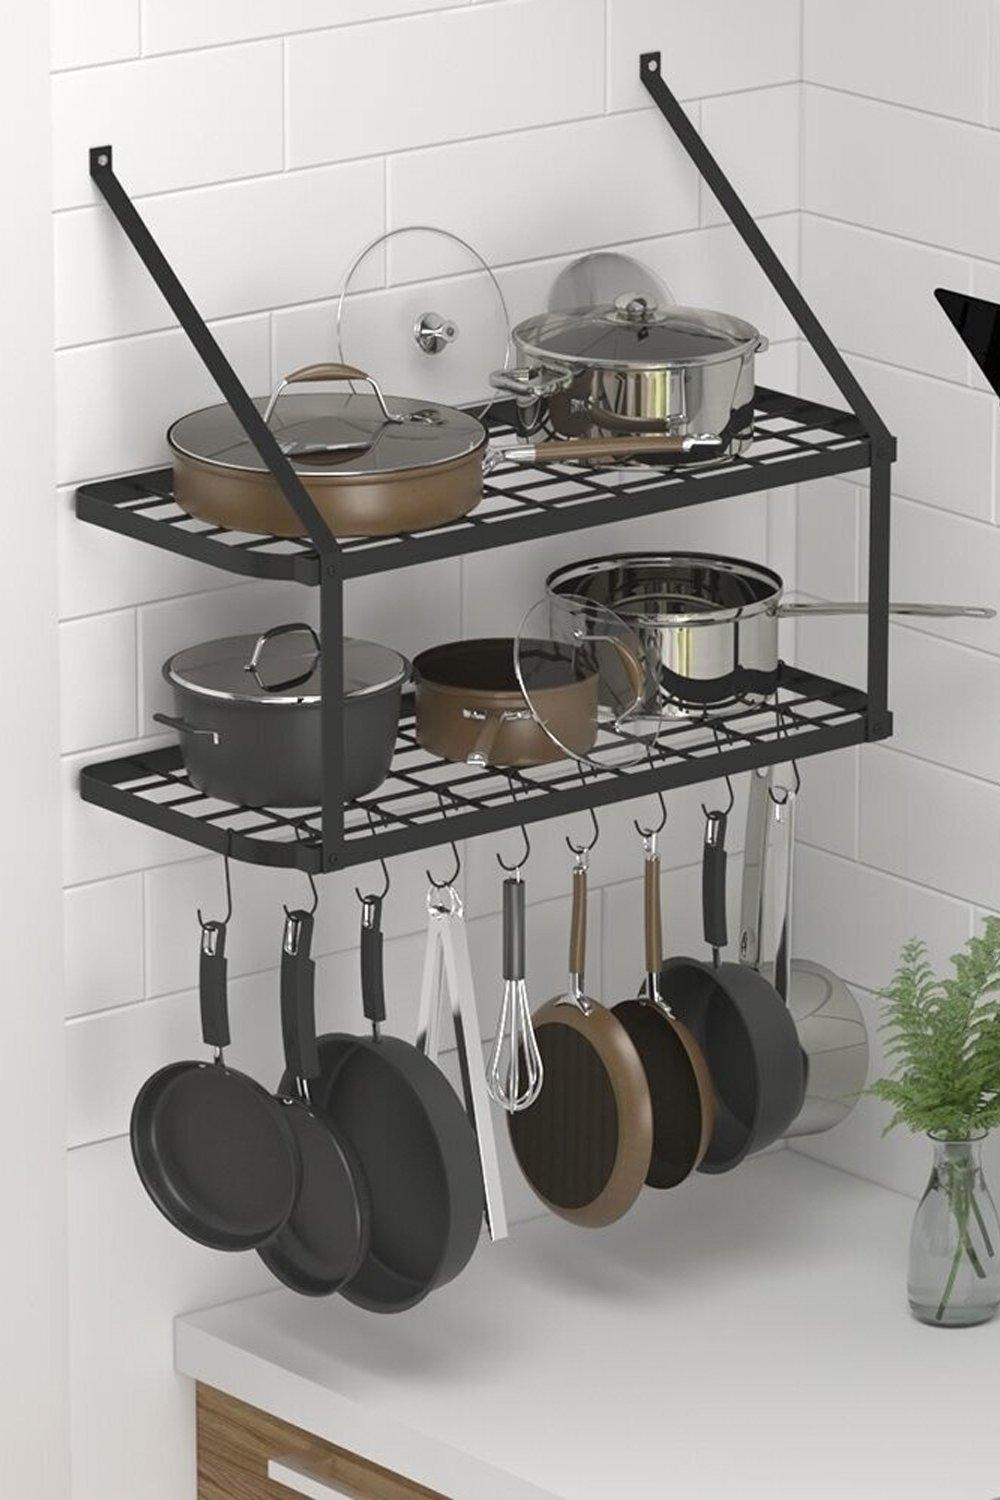 2 Tiers  Wall-Mounted Pan Rack Shelf Pot Holders Storage Drainer with 10 Hooks